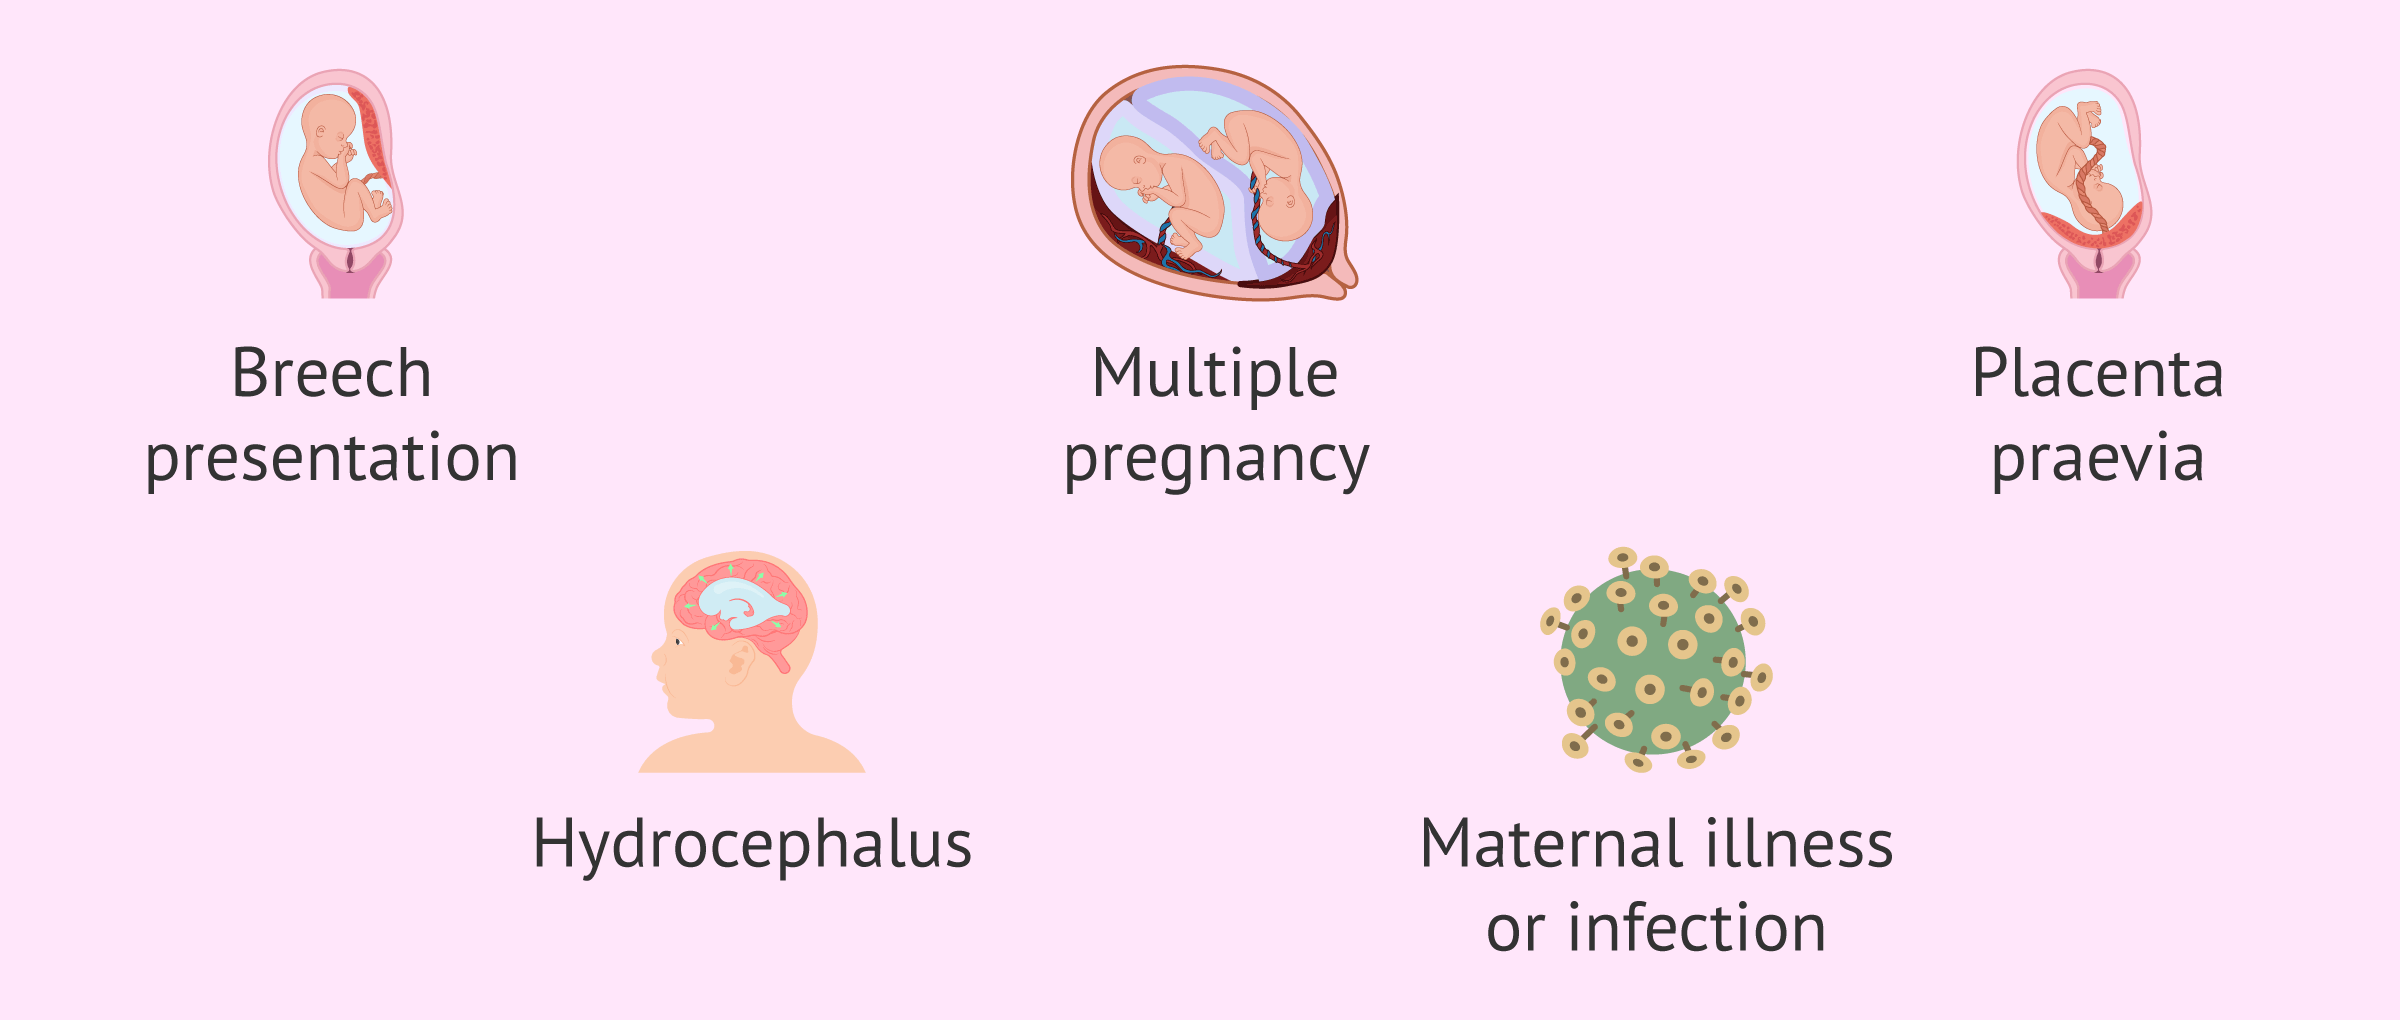 When is it indicated to schedule a caesarean section?